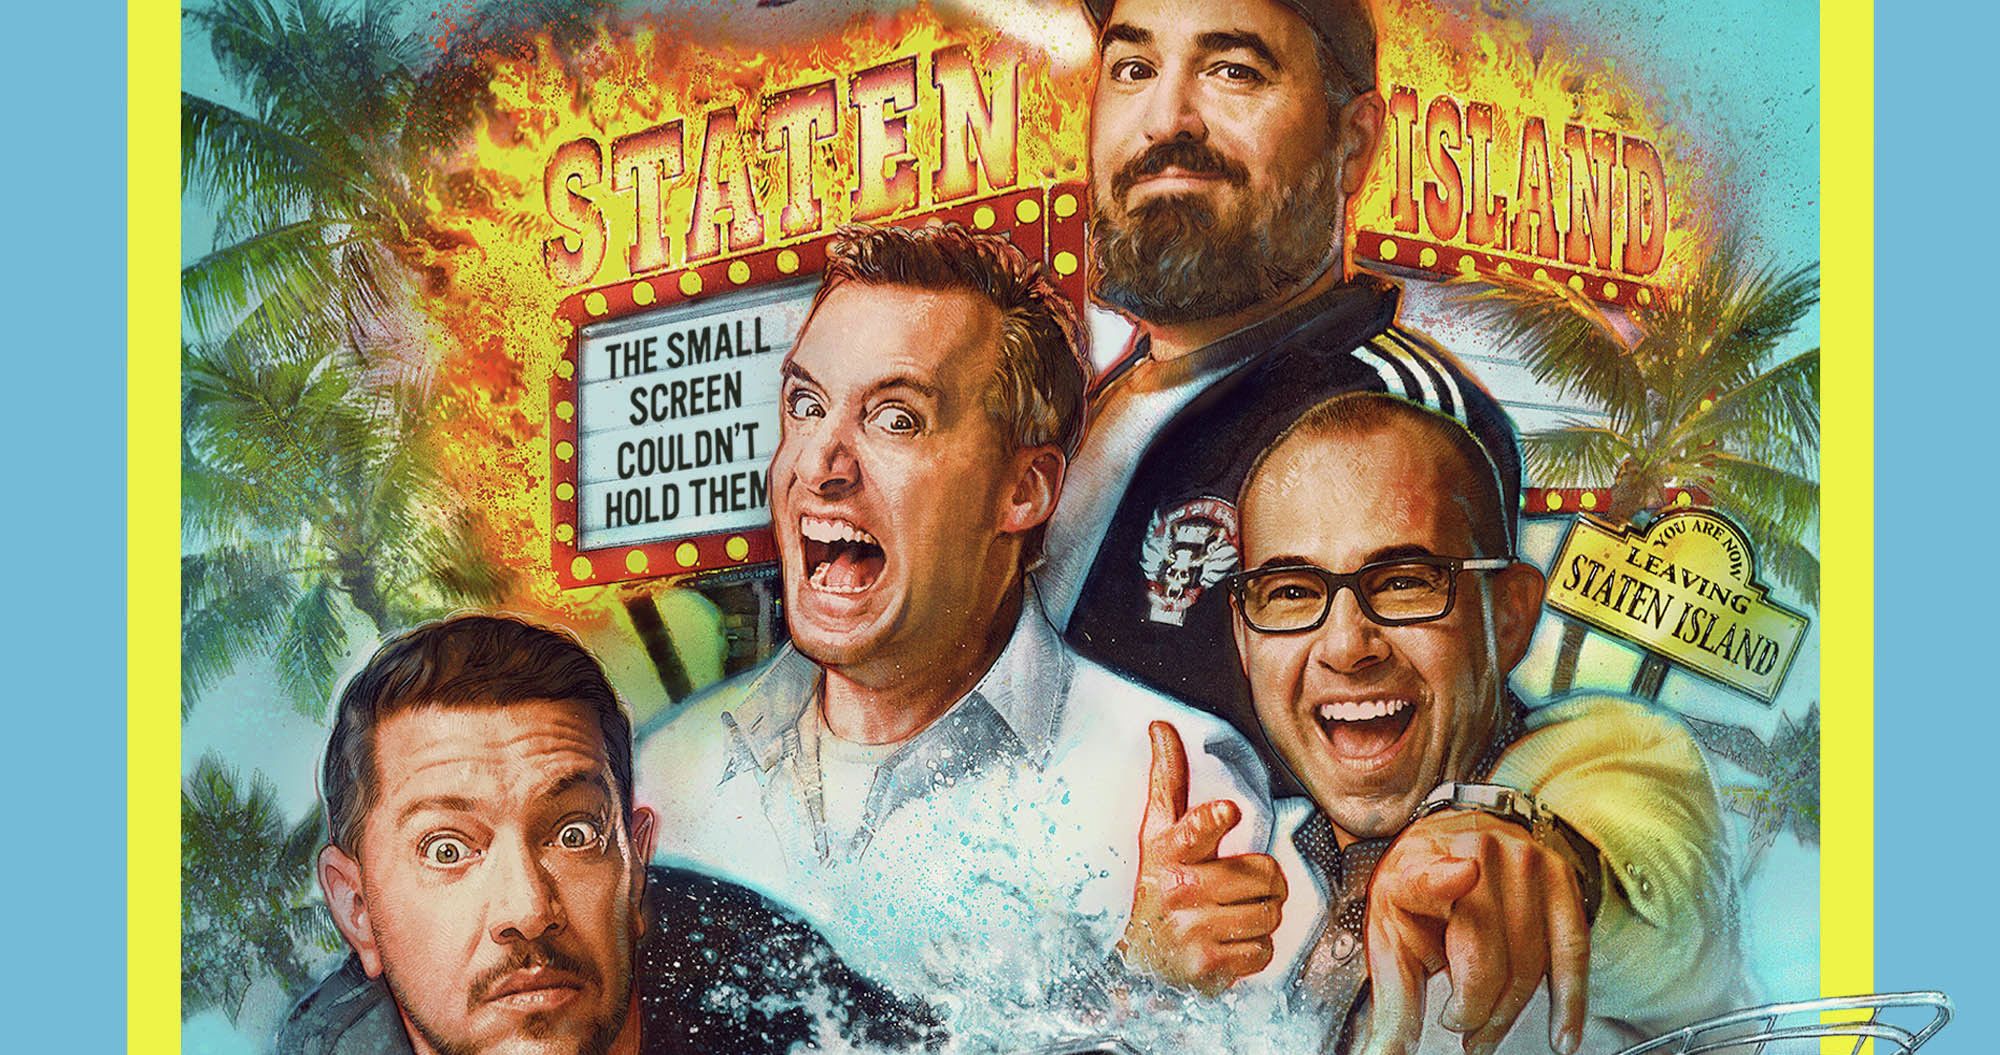 Impractical Jokers: The Movie Gets an Early Digital Release on April Fools' Day